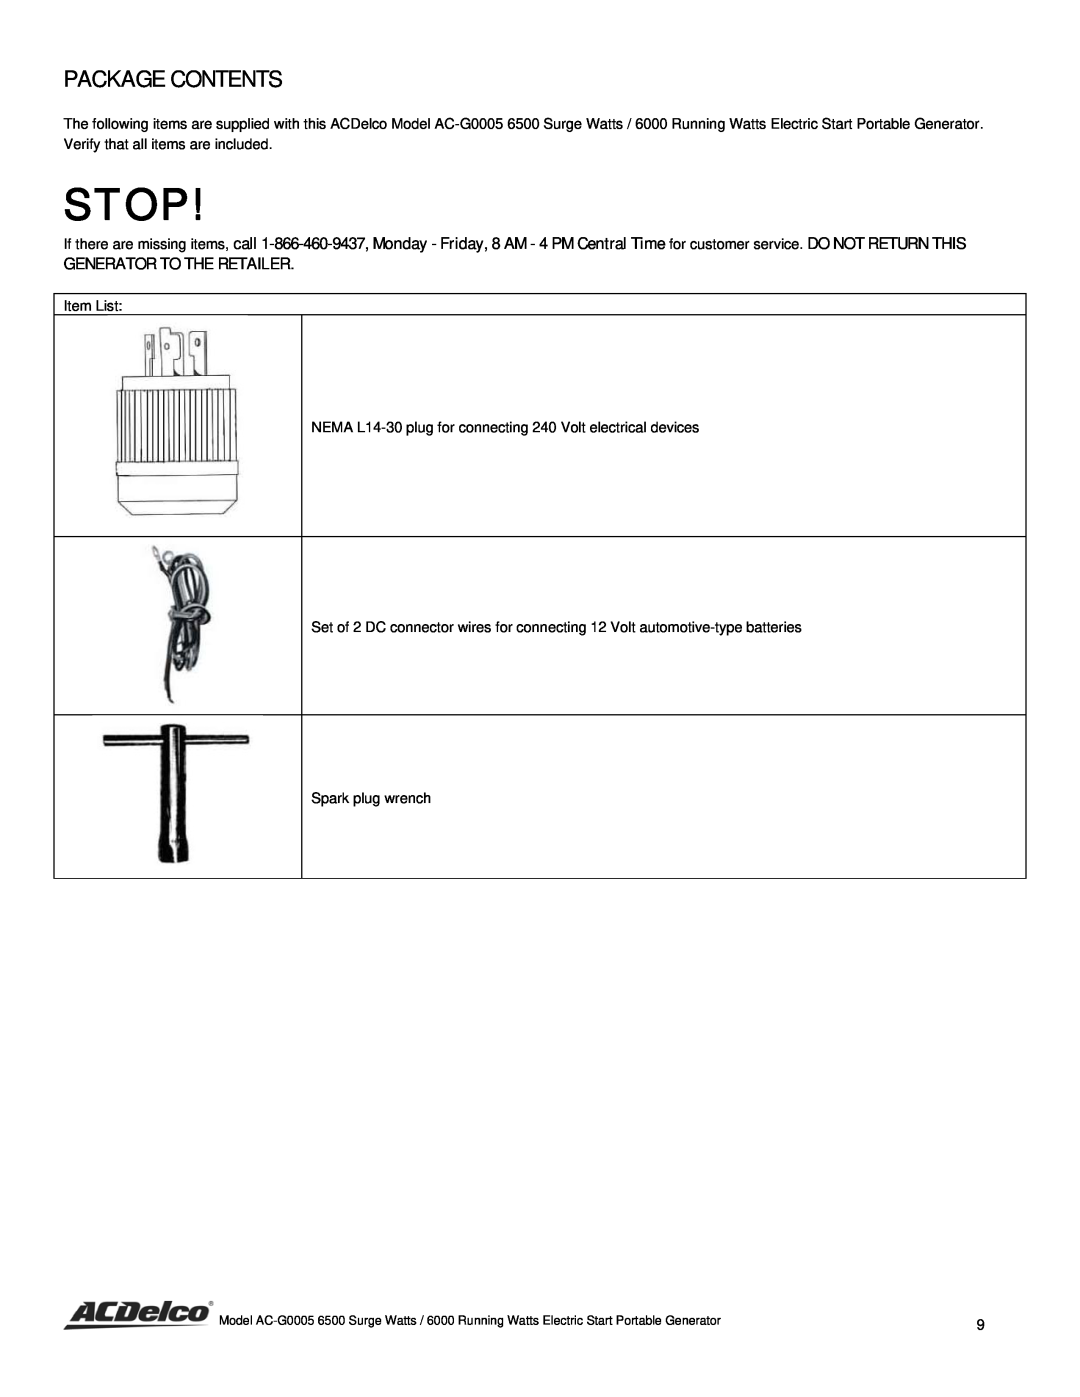 ACDelco AC-G0005 instruction manual Package Contents, Stop, Generator To The Retailer 